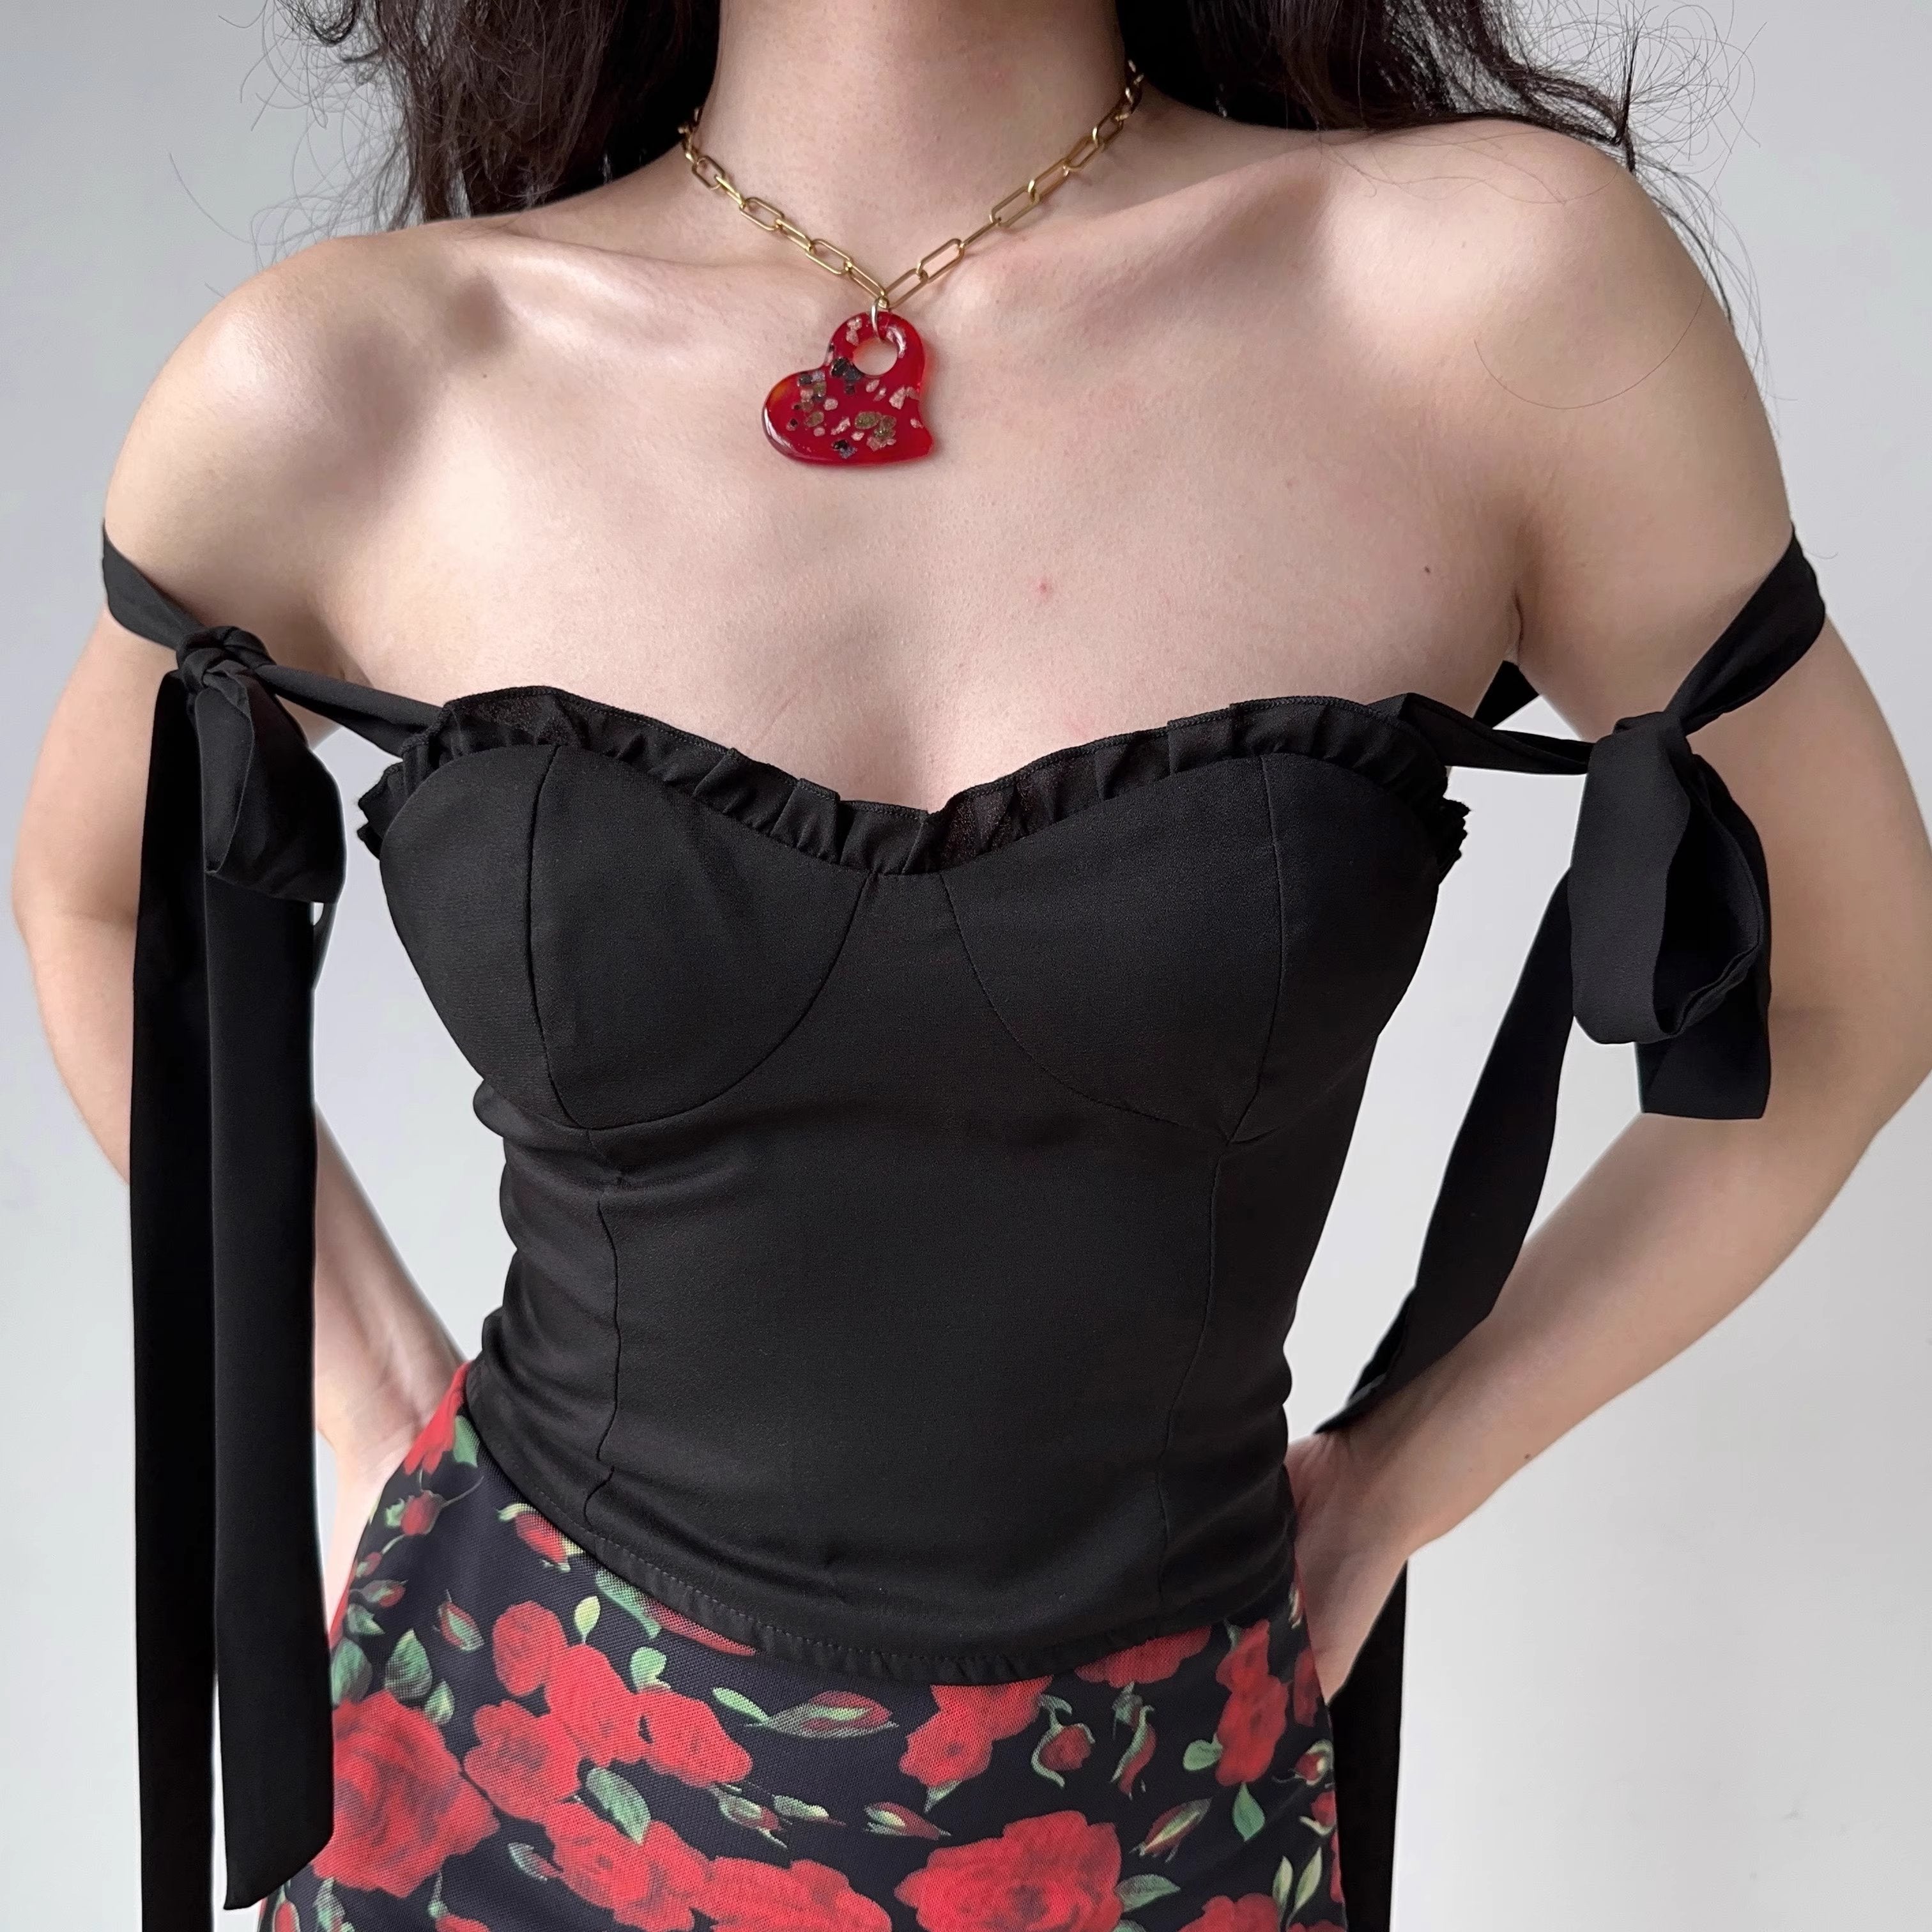 Chicdear - Black Ribbon Bustier Camisole